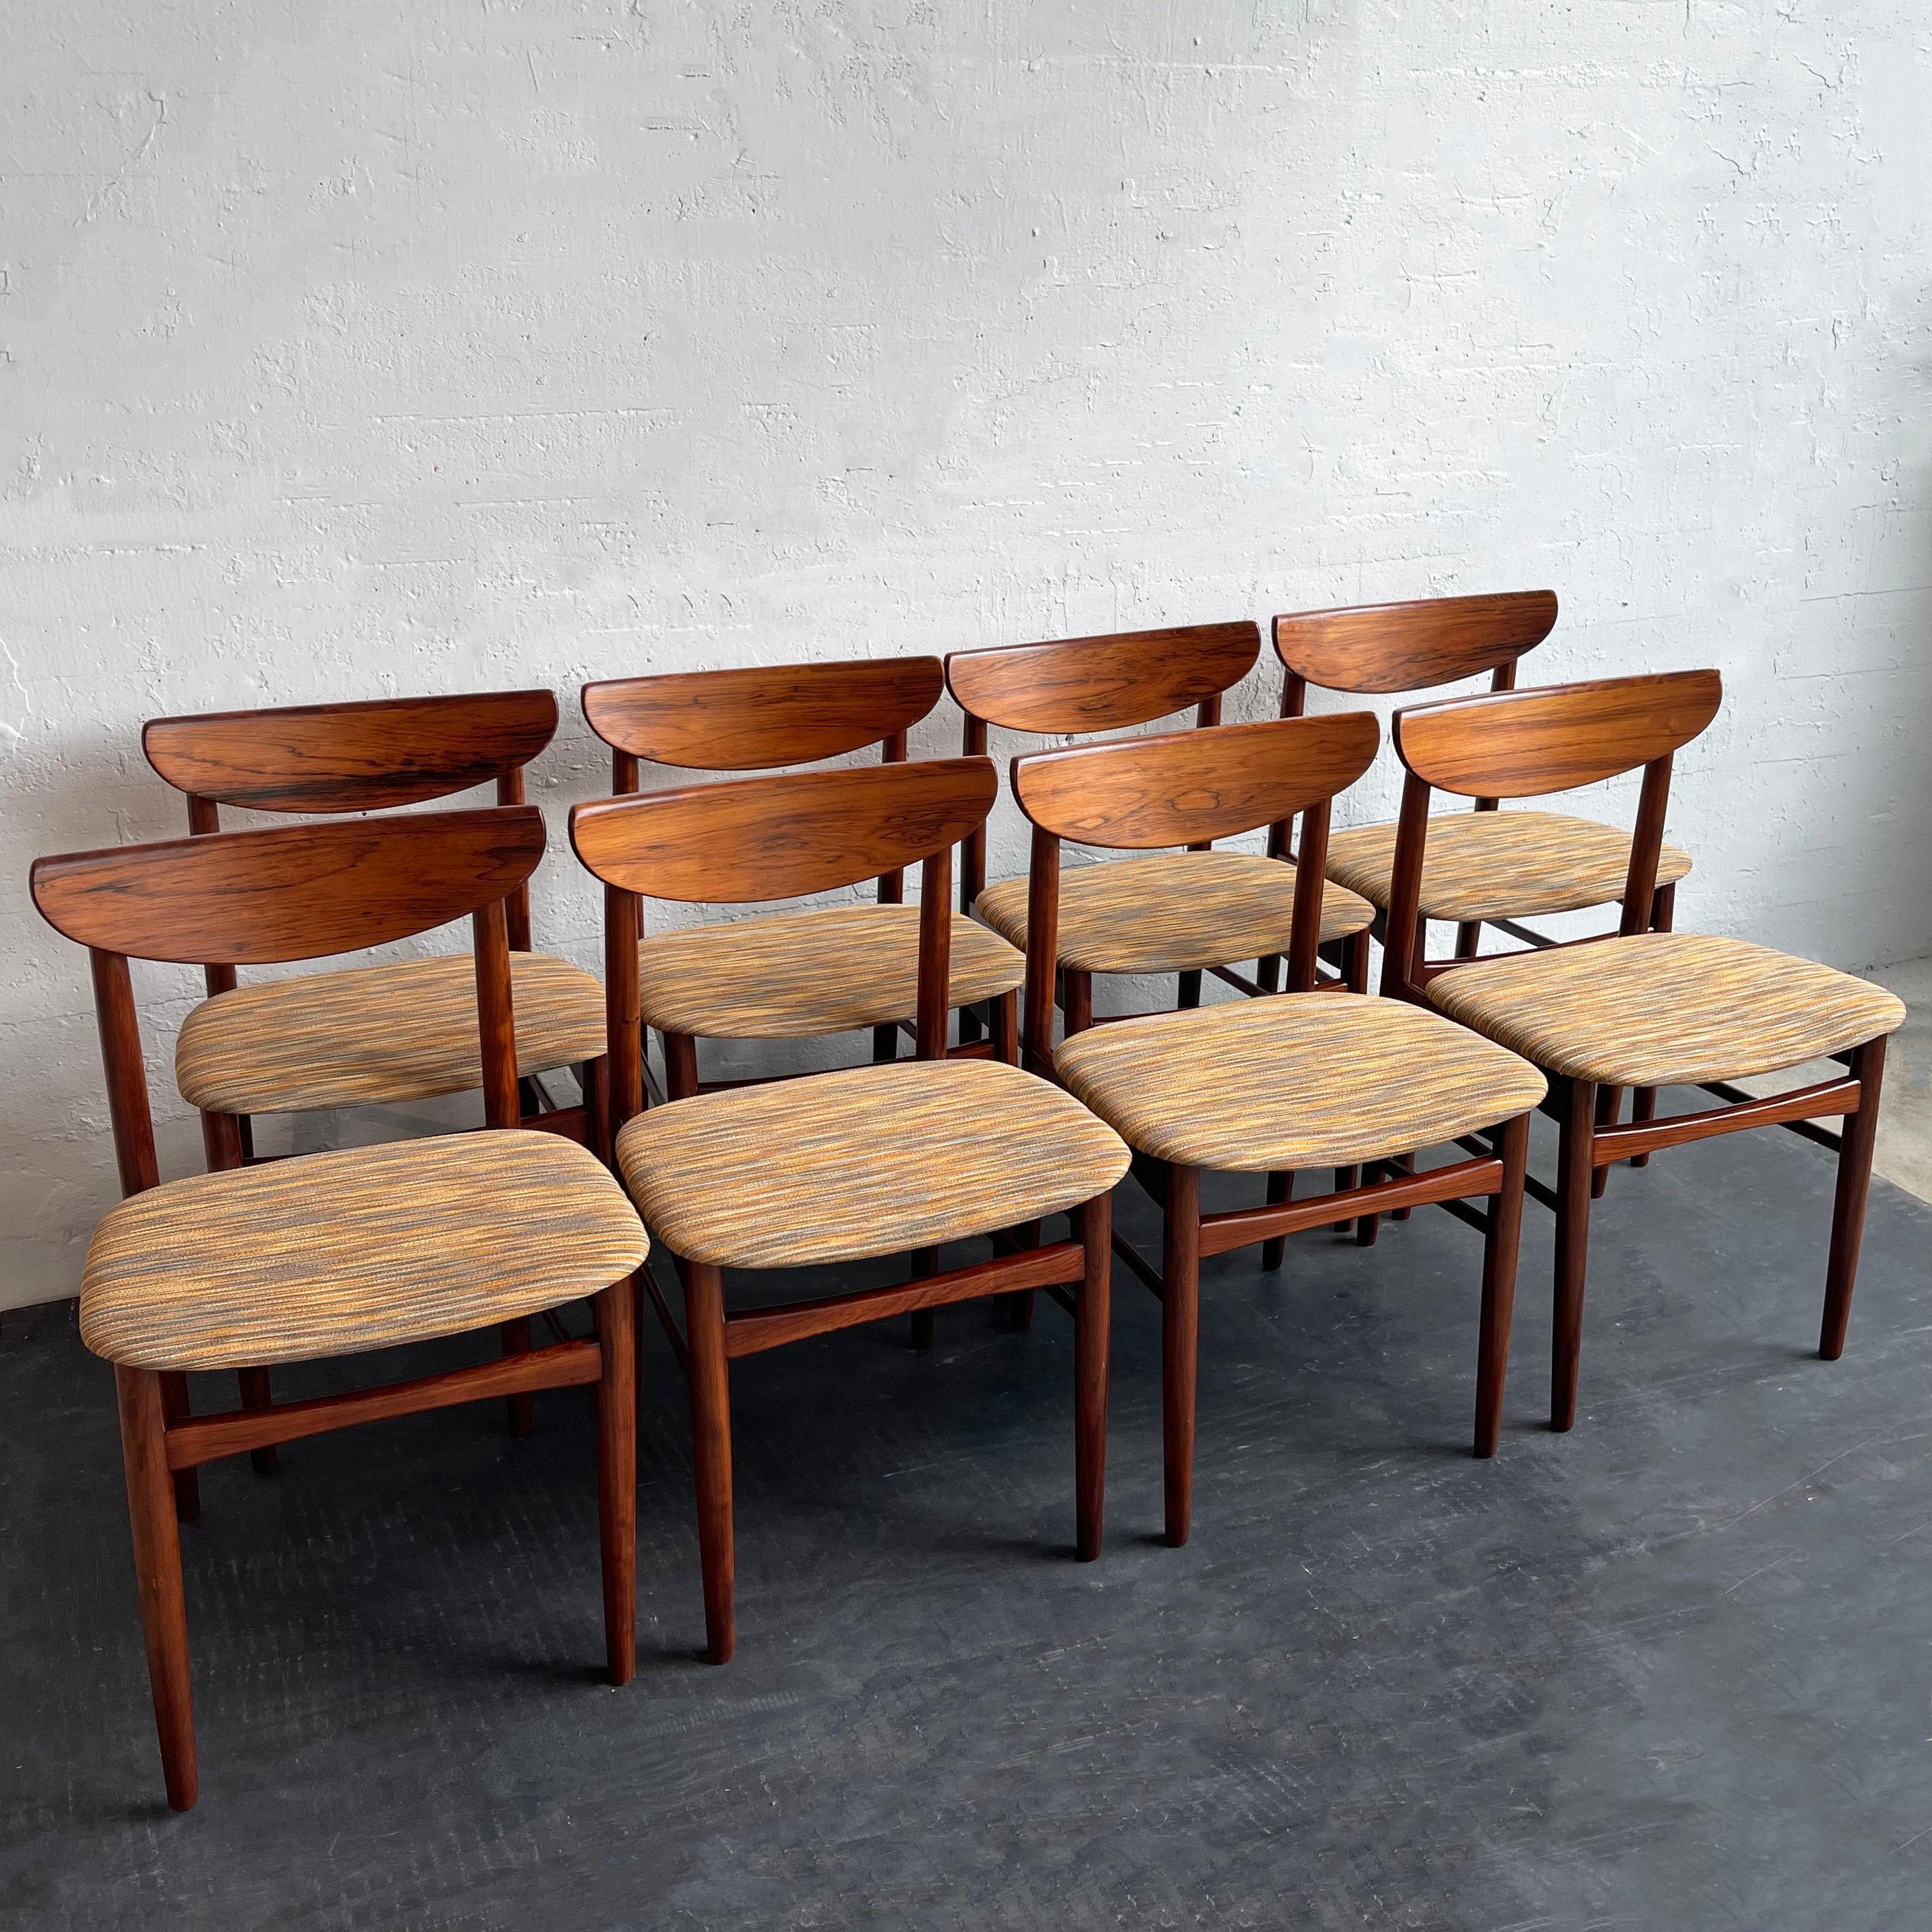 Danish Modern Rosewood Dining Chairs By Kurt Østervig For K.P. Møbler In Good Condition For Sale In Brooklyn, NY